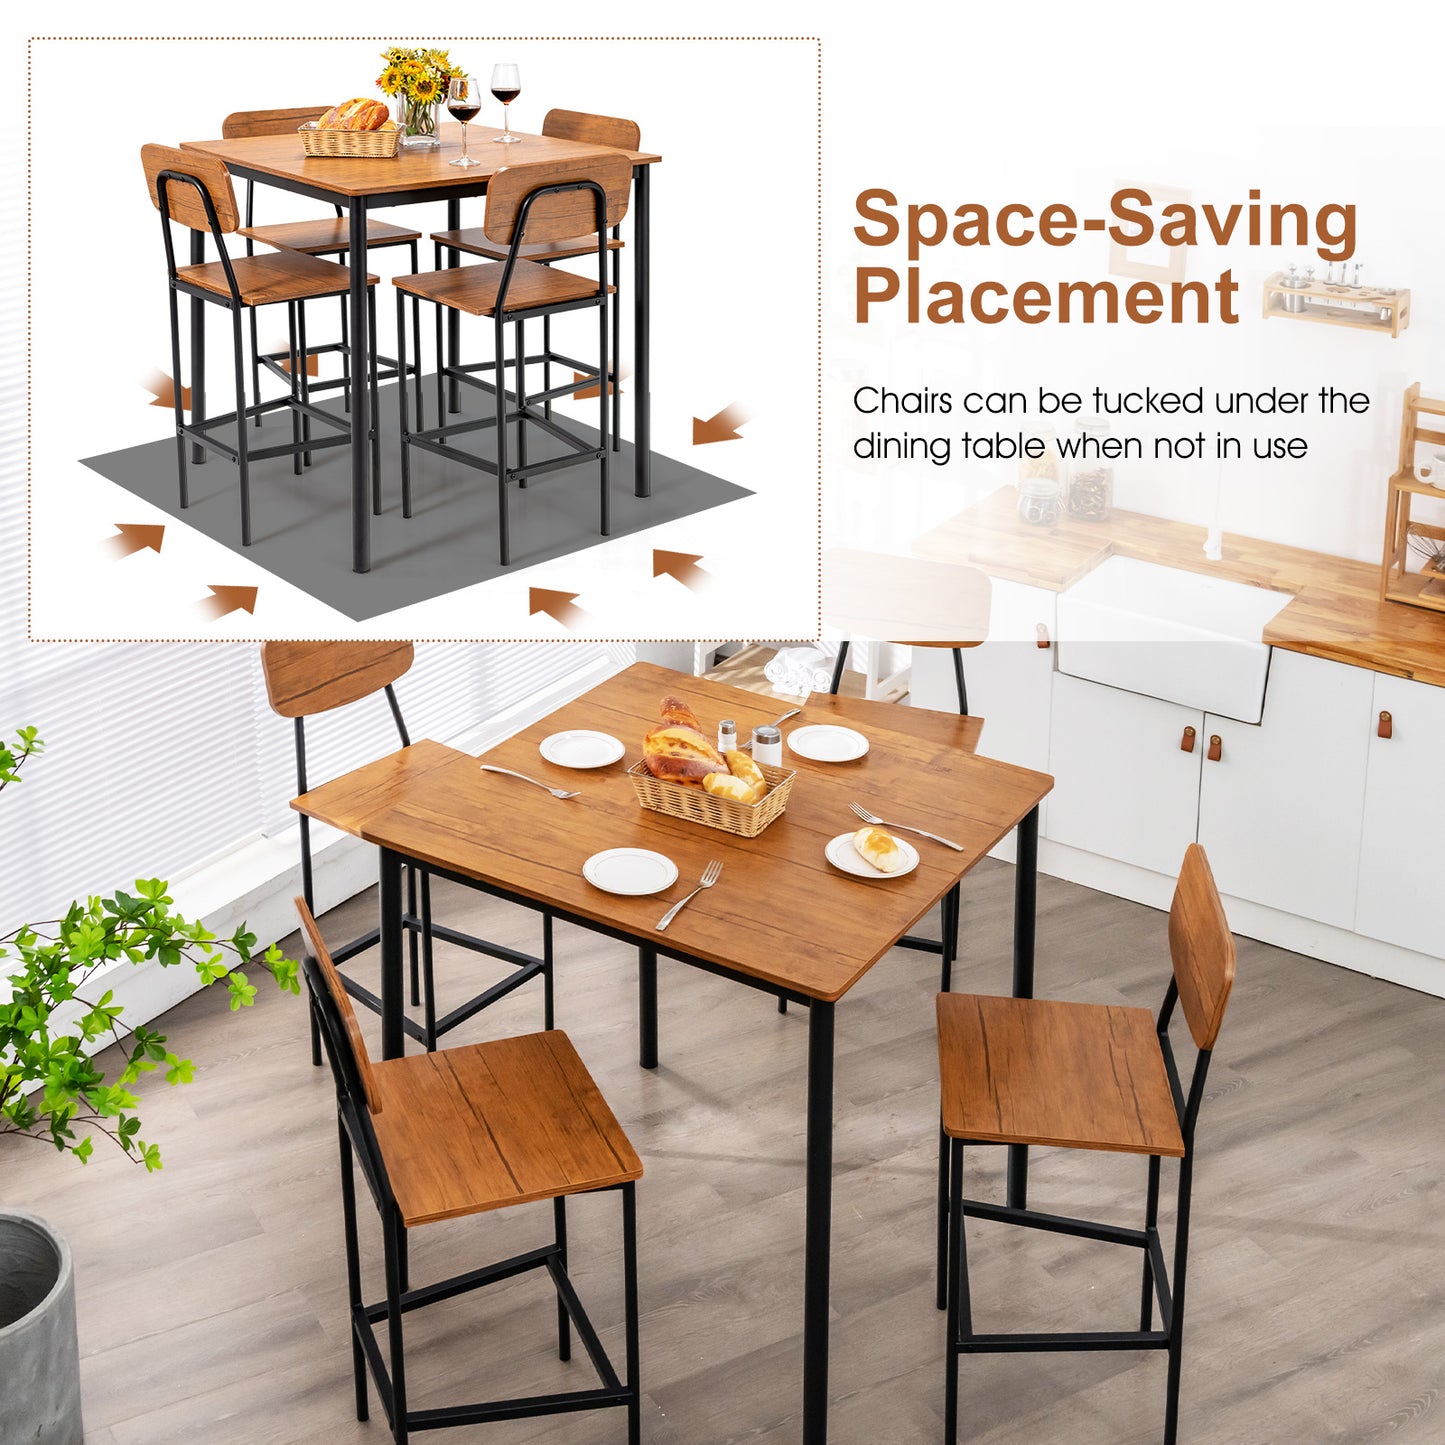 5 Pieces Industrial Dining Table Set with Counter Height Table and 4 Bar Stools-Walnut